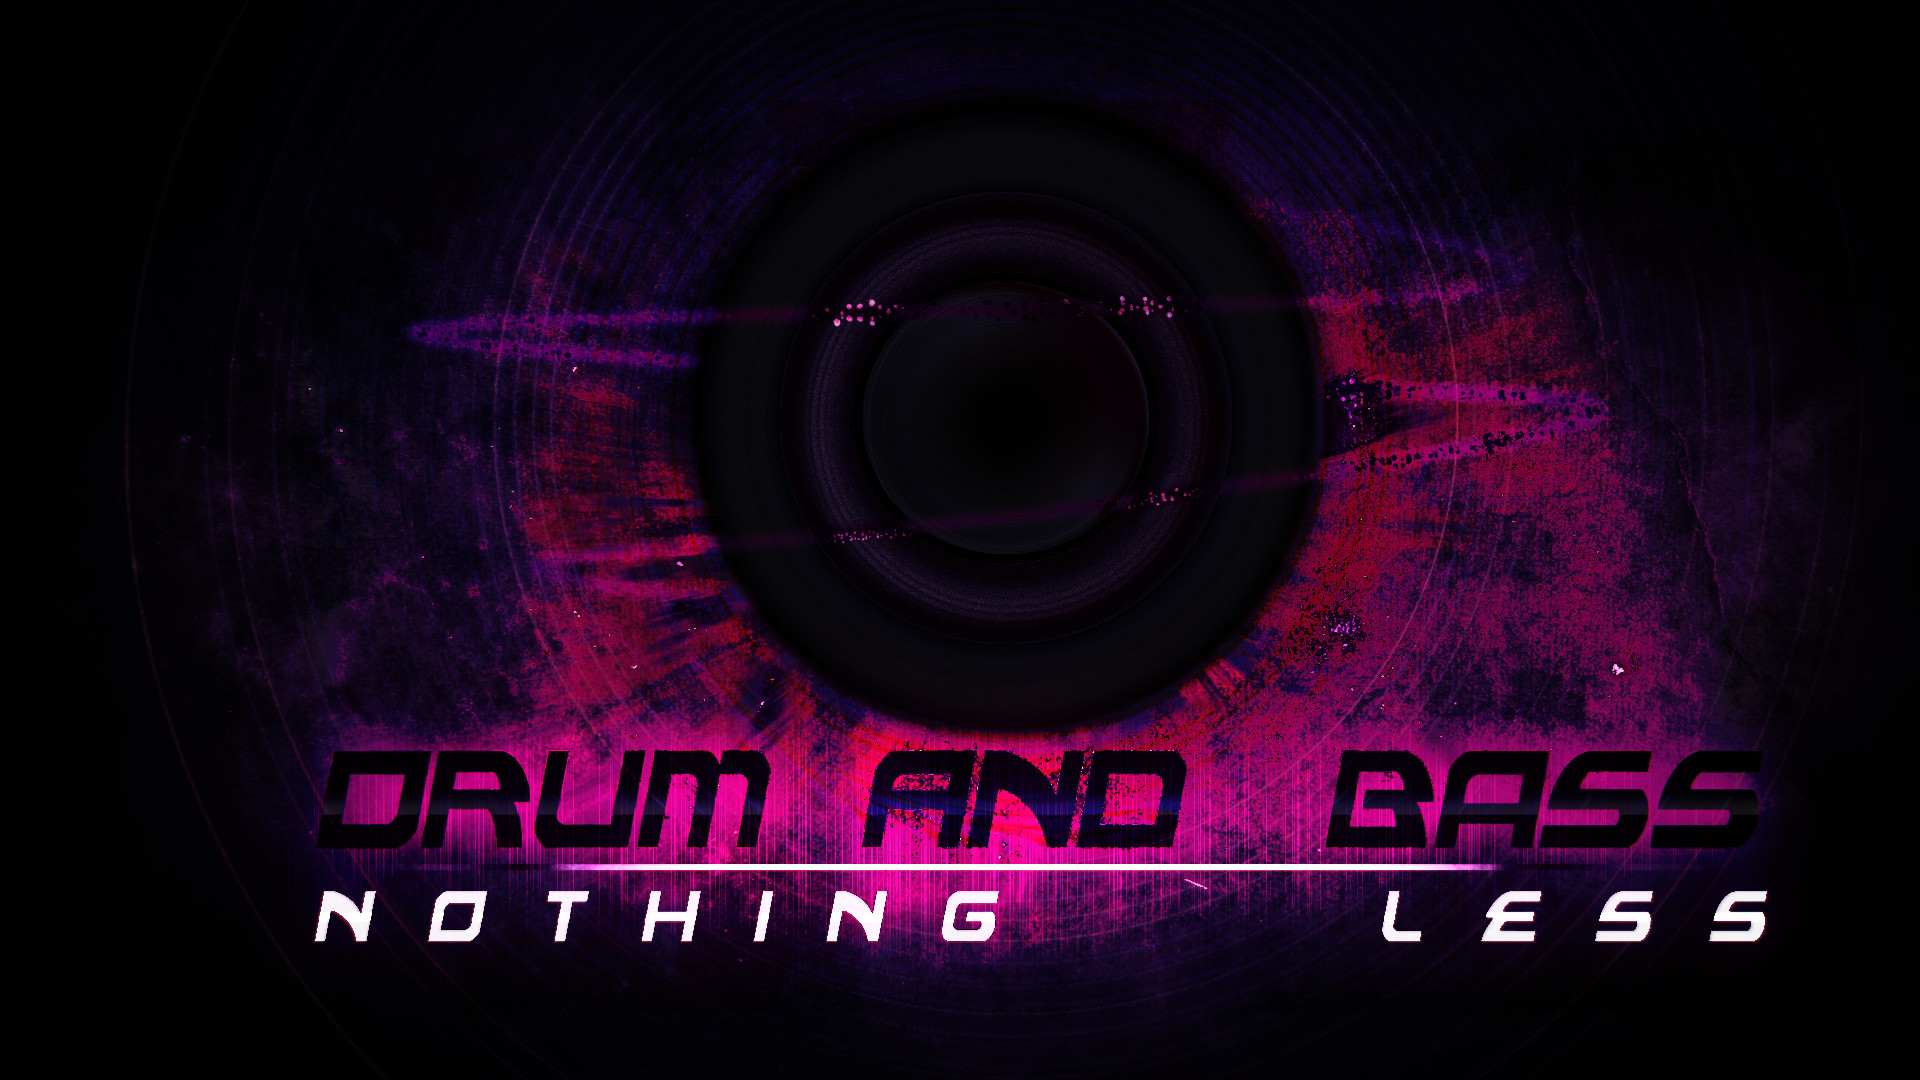 Drum and bass лучшее. Drum and Bass. Стиль Drum and Bass. Drum and Bass картинки. Значок Drum&Bass.